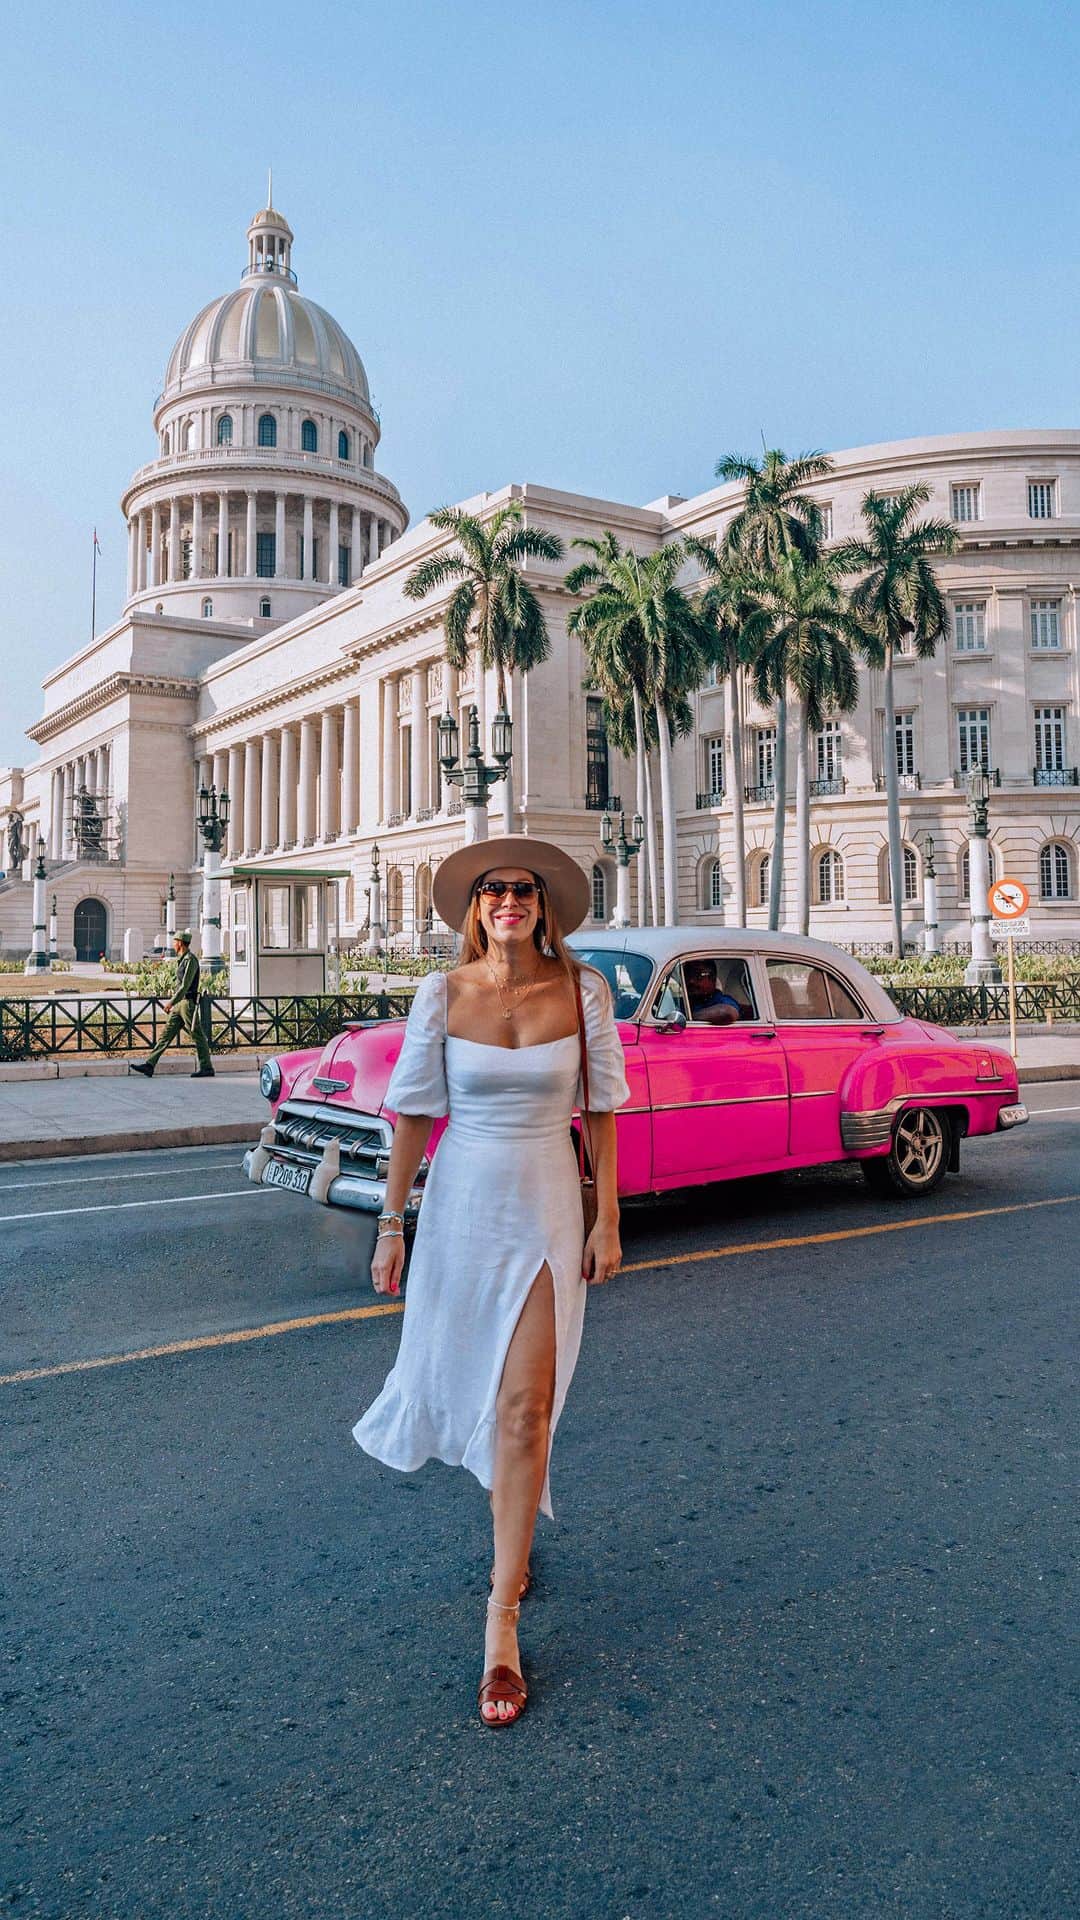 Izkizのインスタグラム：「Havana ooh no-na, you have stolen my heart. I didn’t know what to expect but this city has surprised me in the very best way ♥️🇨🇺 #CubaUnica」